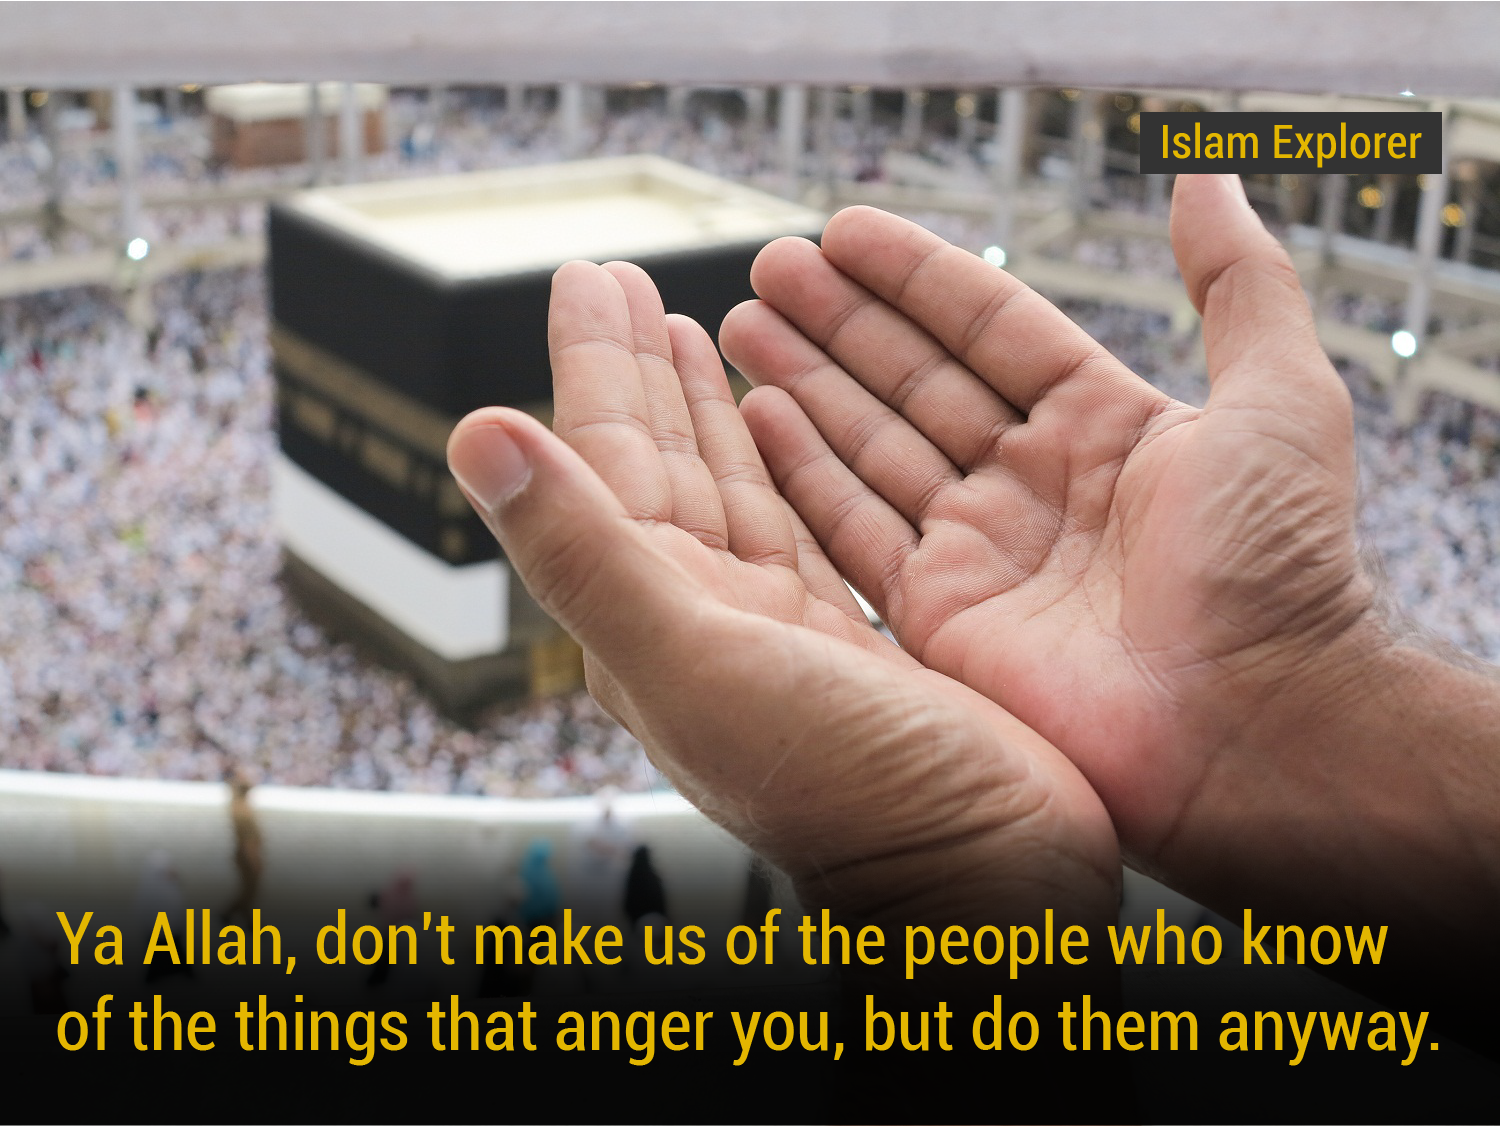 don’t make us of the people who know of the things that anger you